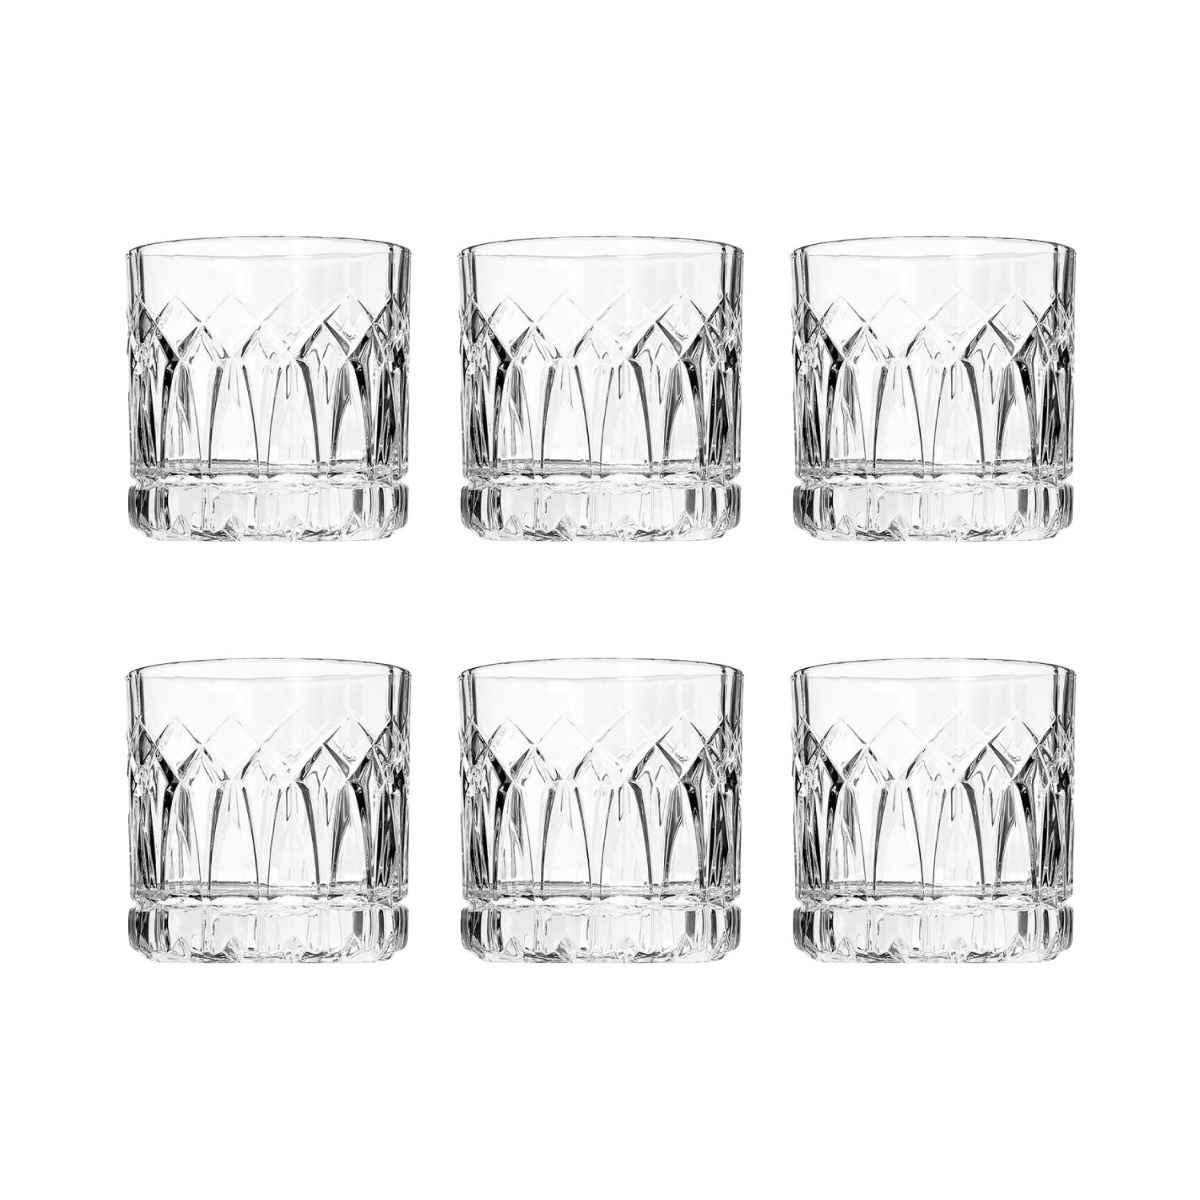 OCEAN TRAZE PAST (PST) DOUBLE ROCK GLASS, PACK OF 6, 350 ML